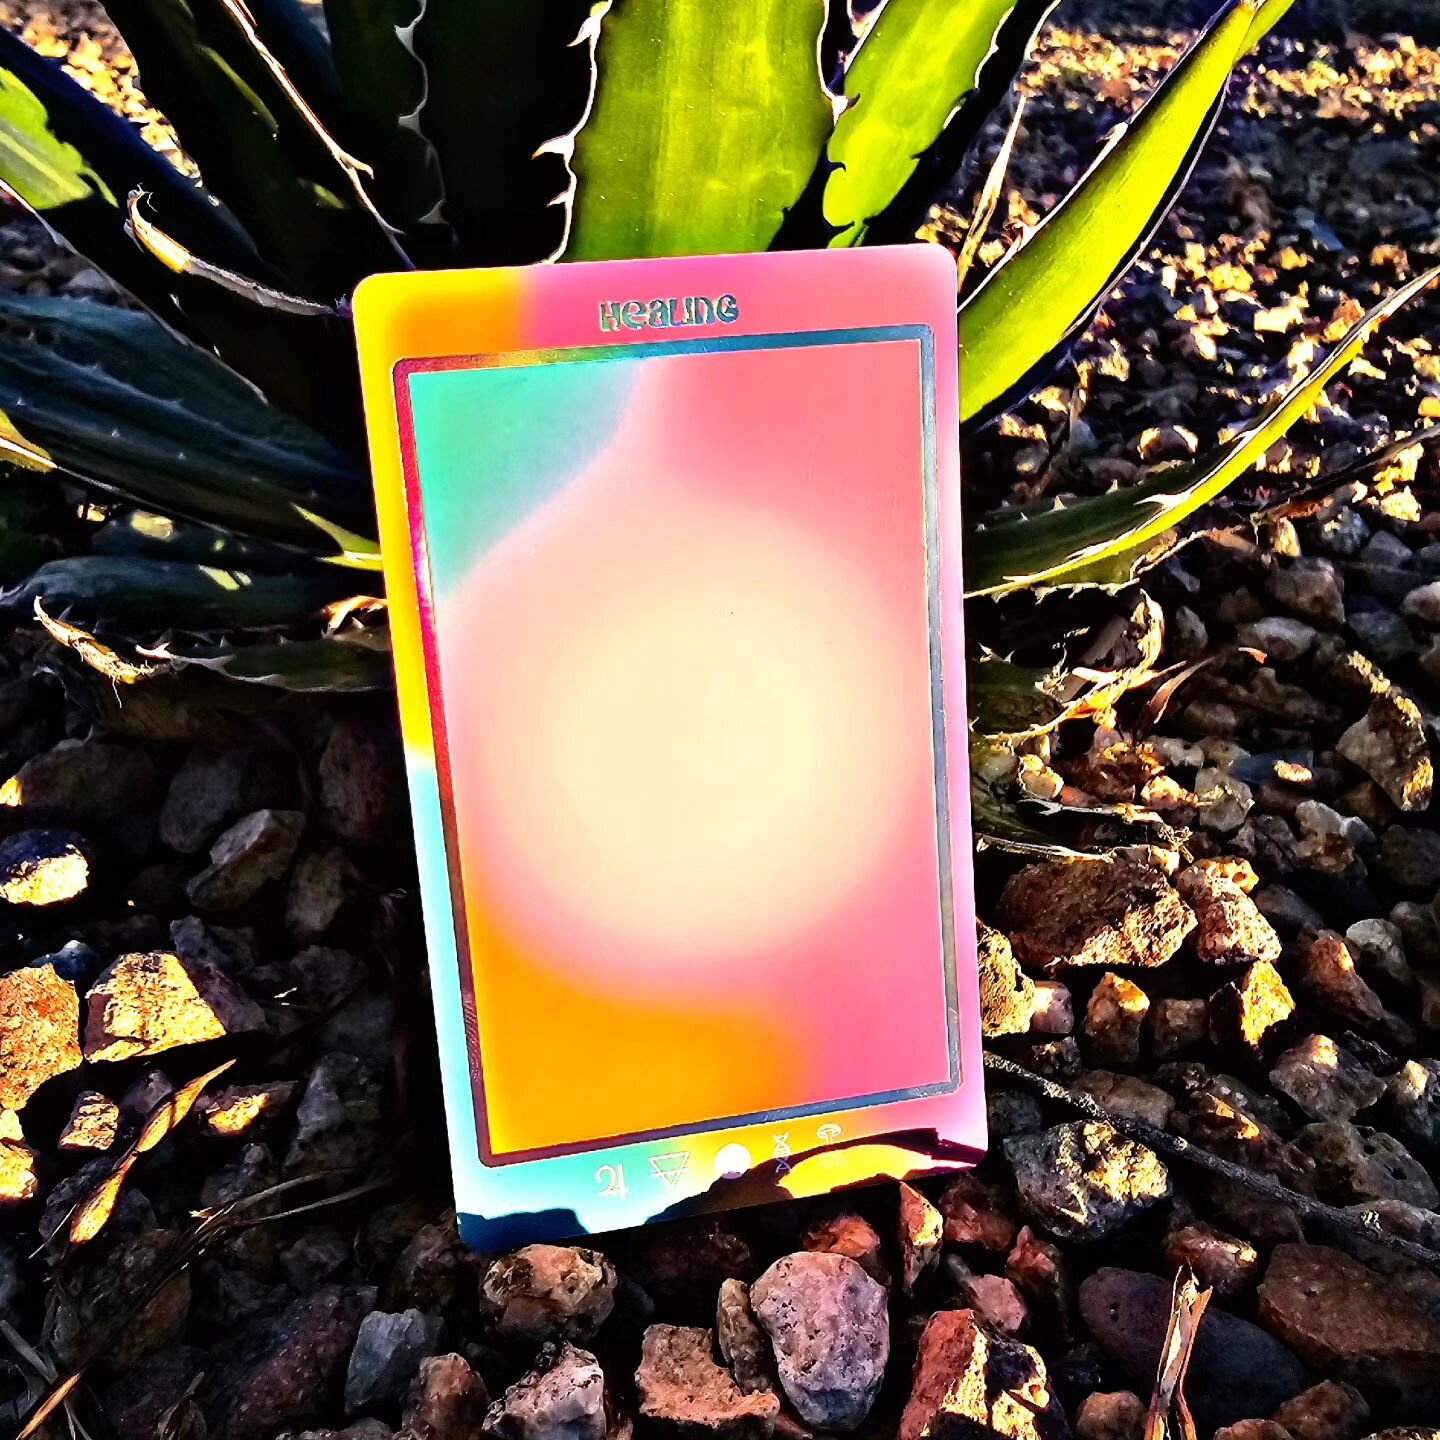 ☆ NEW HEALING OFFERING ☆⁣
⁣
I have been in deep study and reflection for many months, learning and working with these powerful tools. Bringing Color-Light into my life has radically improved my overall being. These tools are the future, and I'm thril